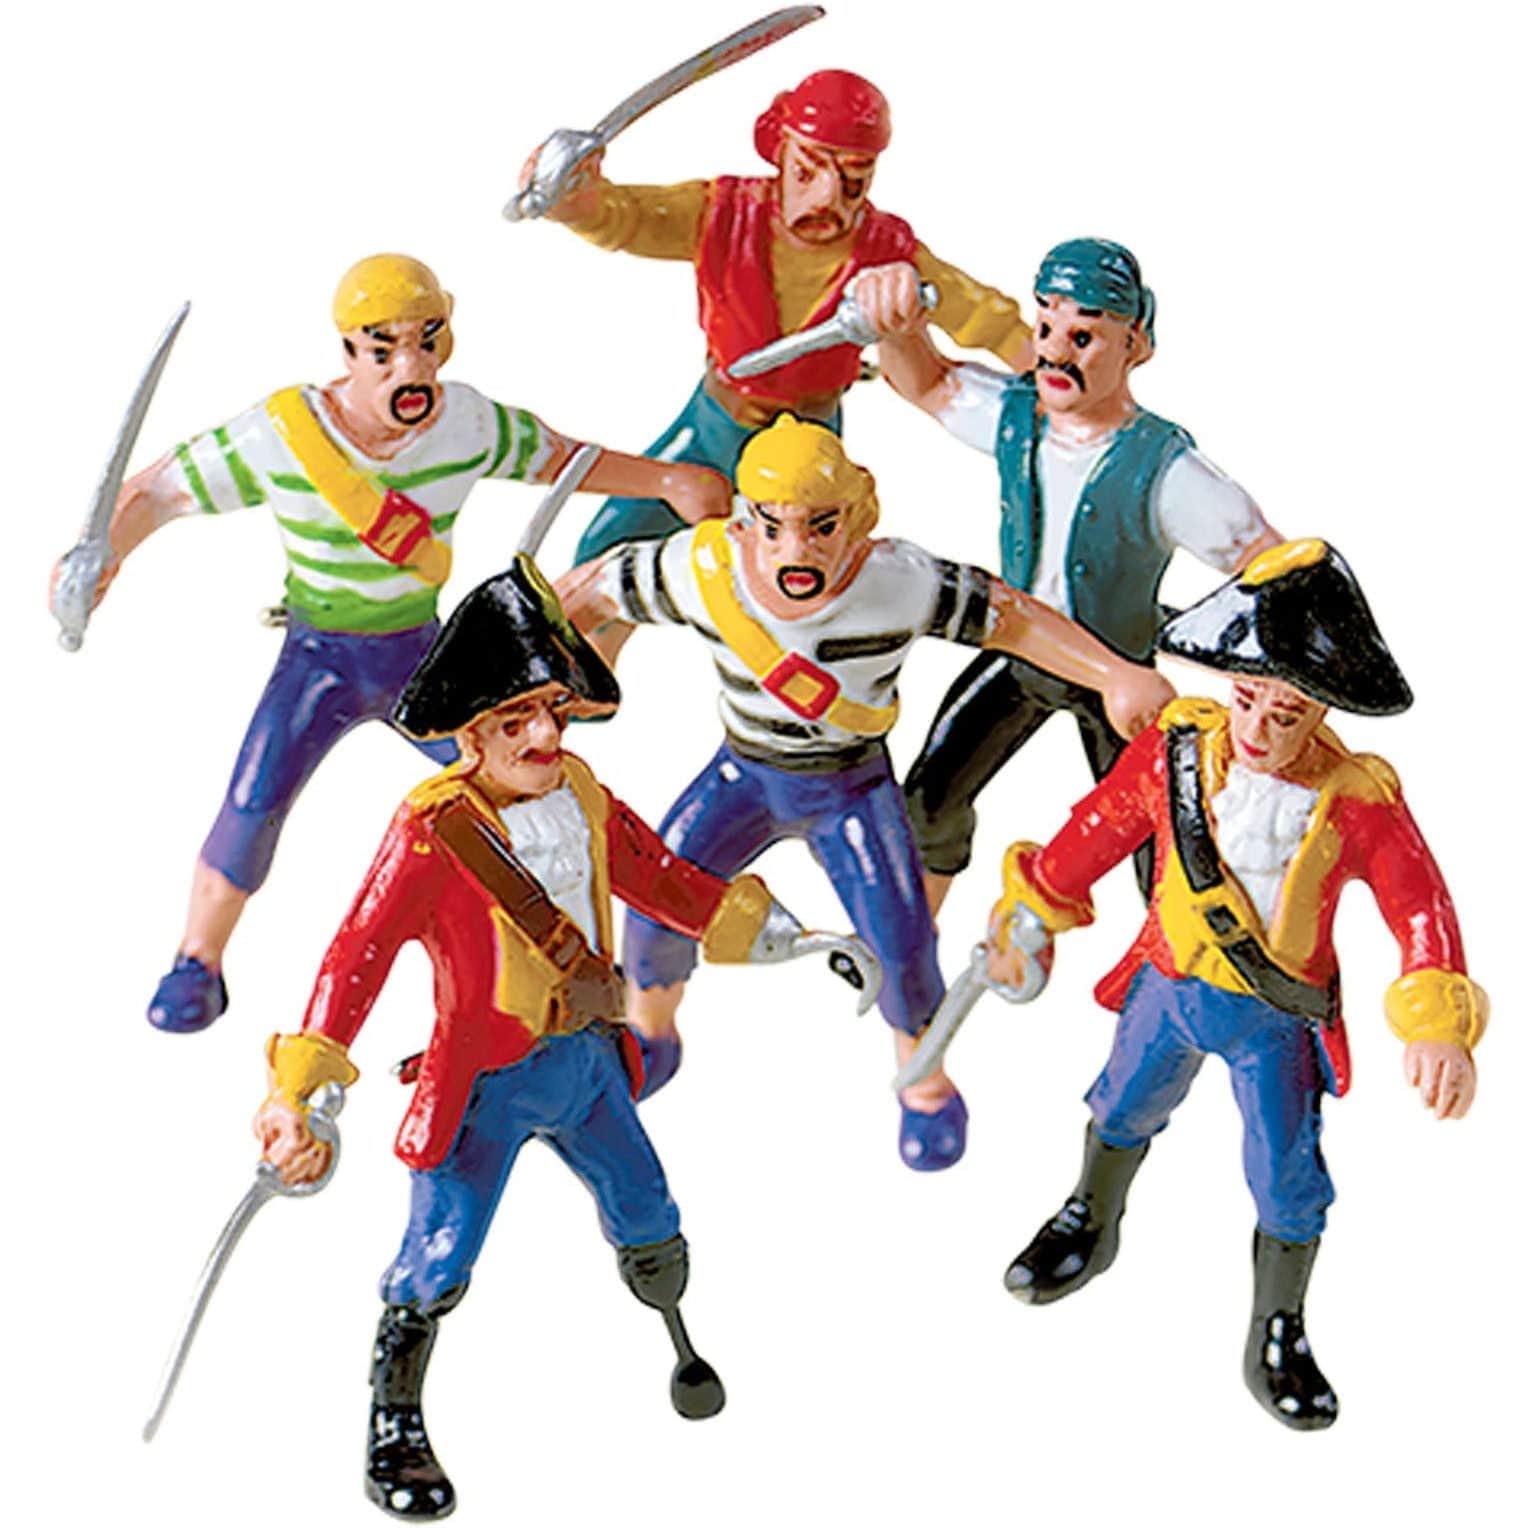 Amscan TOYS Pirate Figure